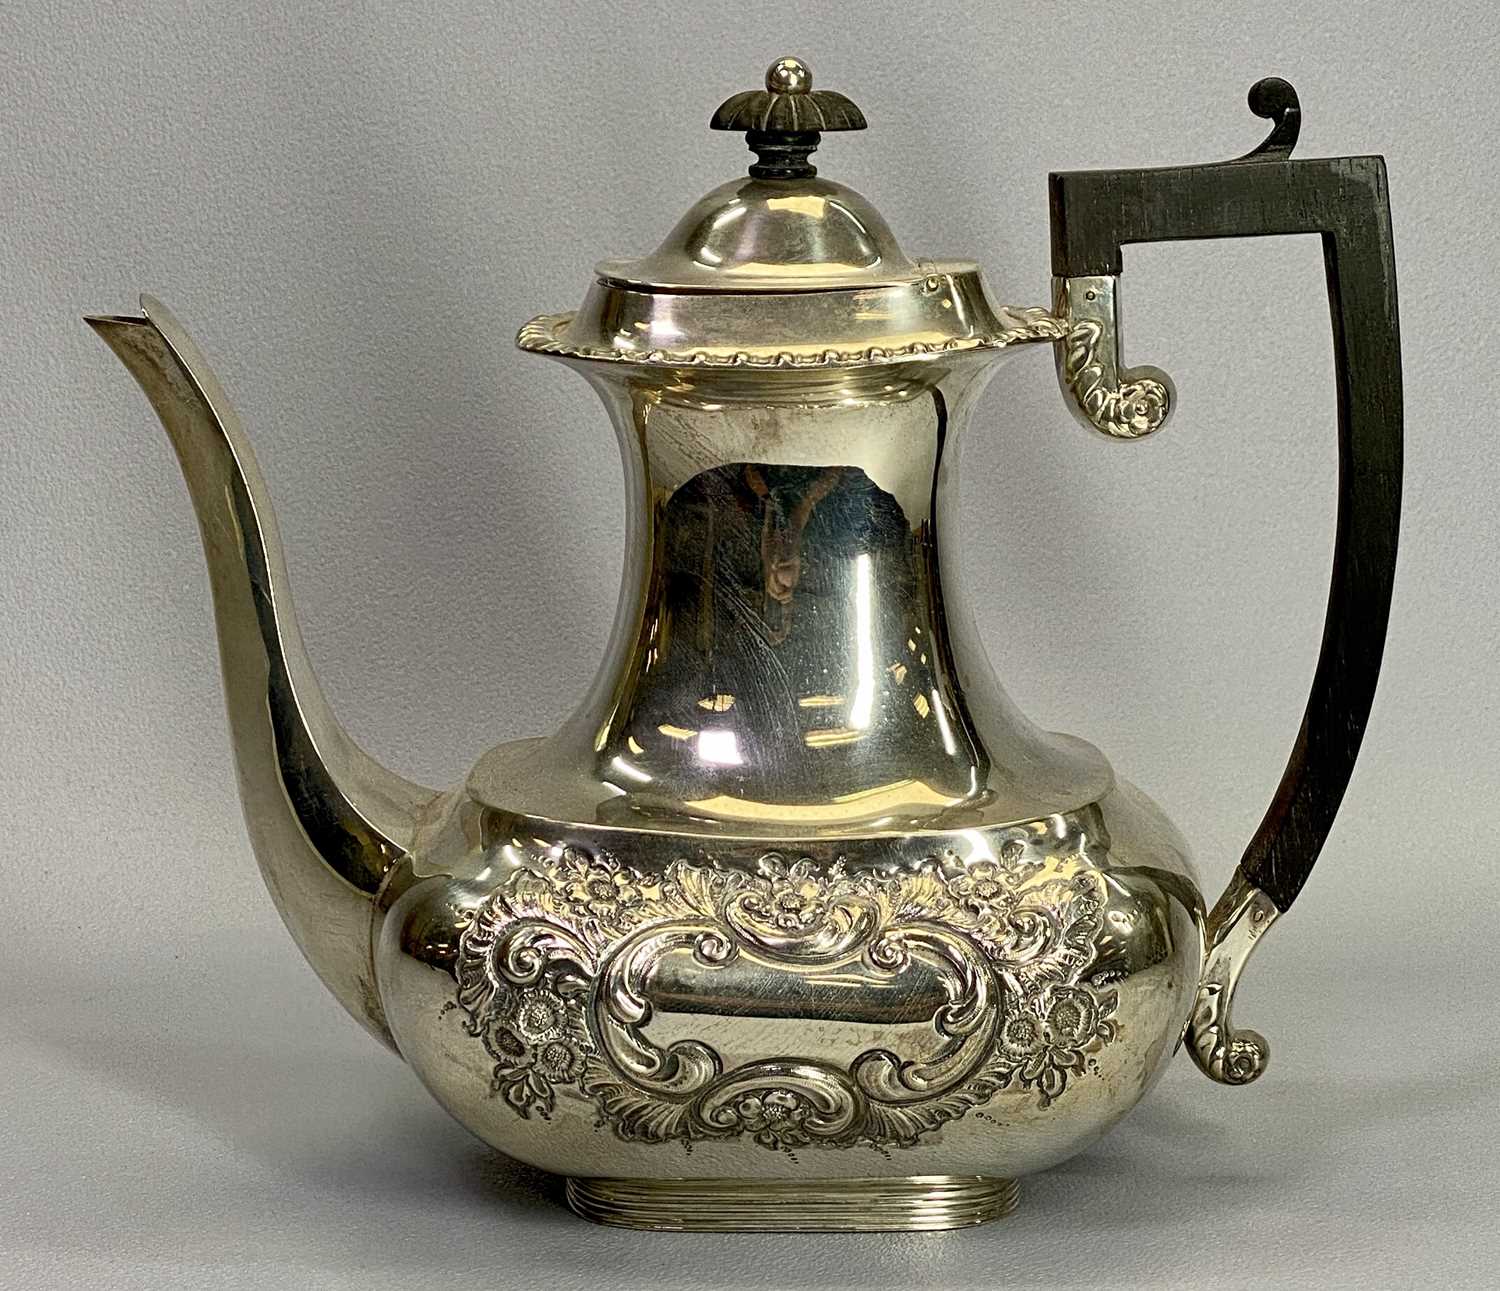 BIRMINGHAM VICTORIAN SILVER TEAPOT 1899 - Maker Synyer & Beddoes, waisted form with floral - Image 2 of 3